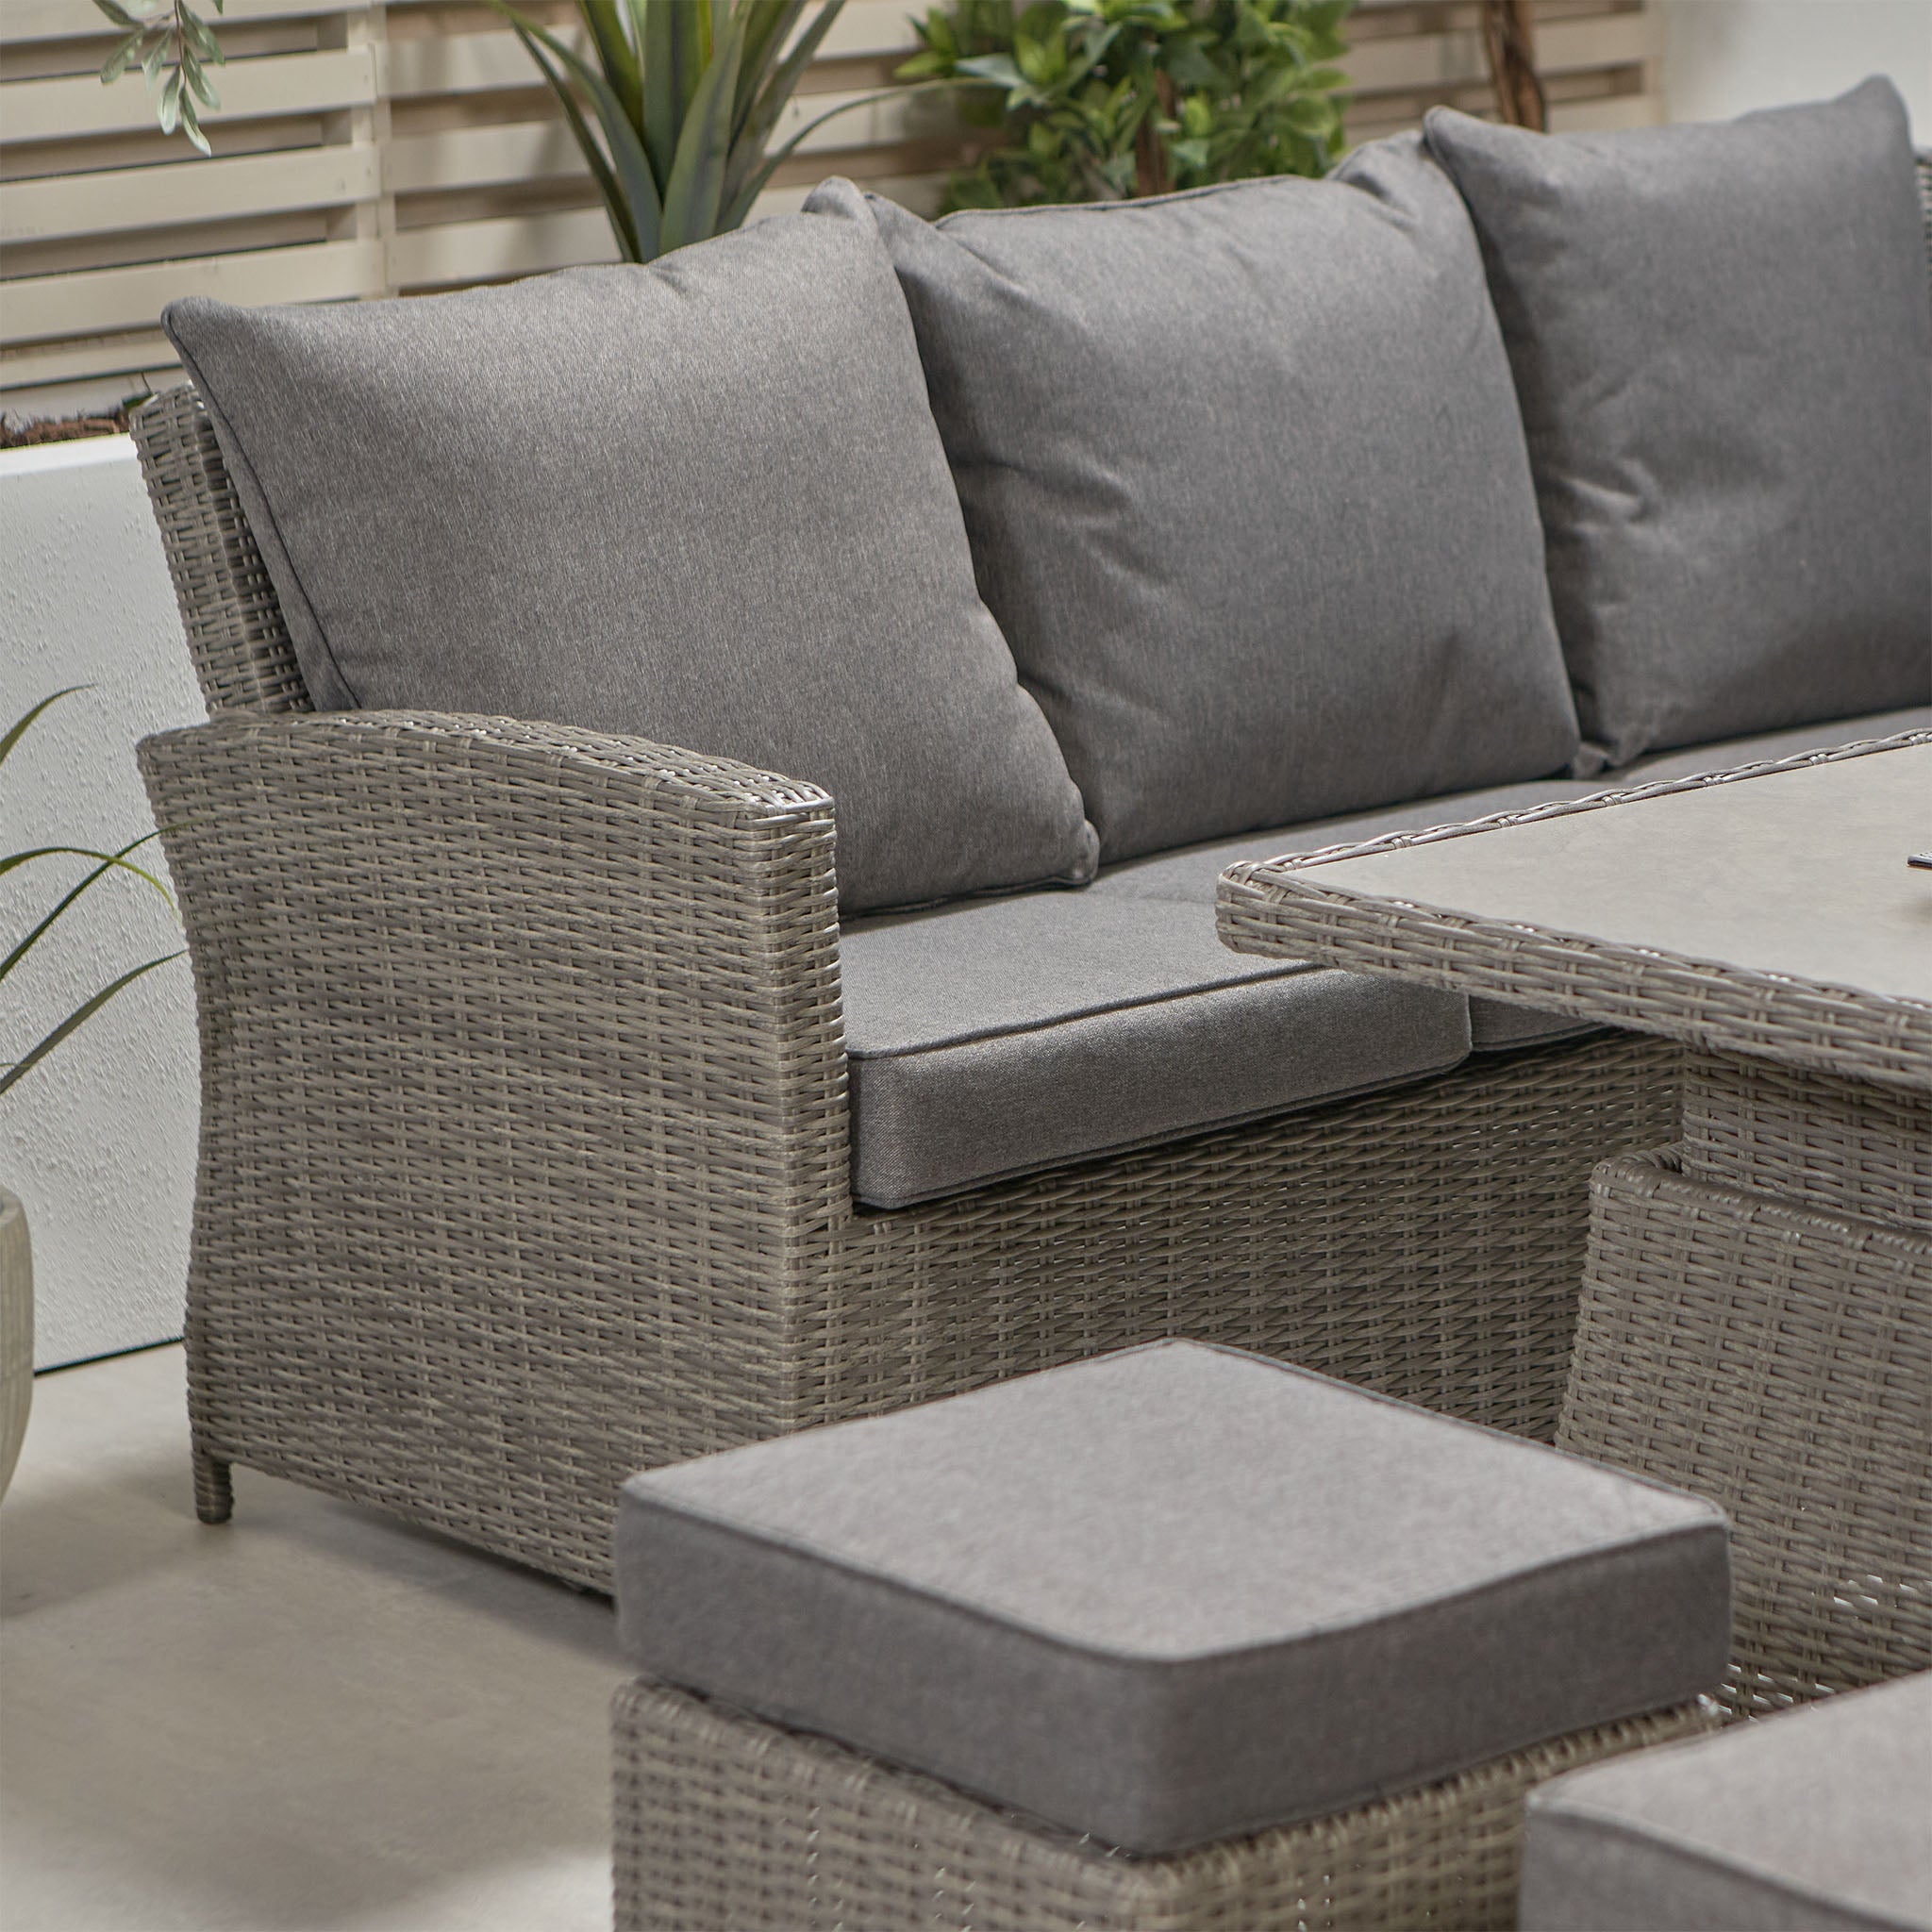 Barbados Rattan Corner Dining Set with Rising Table in Slate Grey (Left Hand)